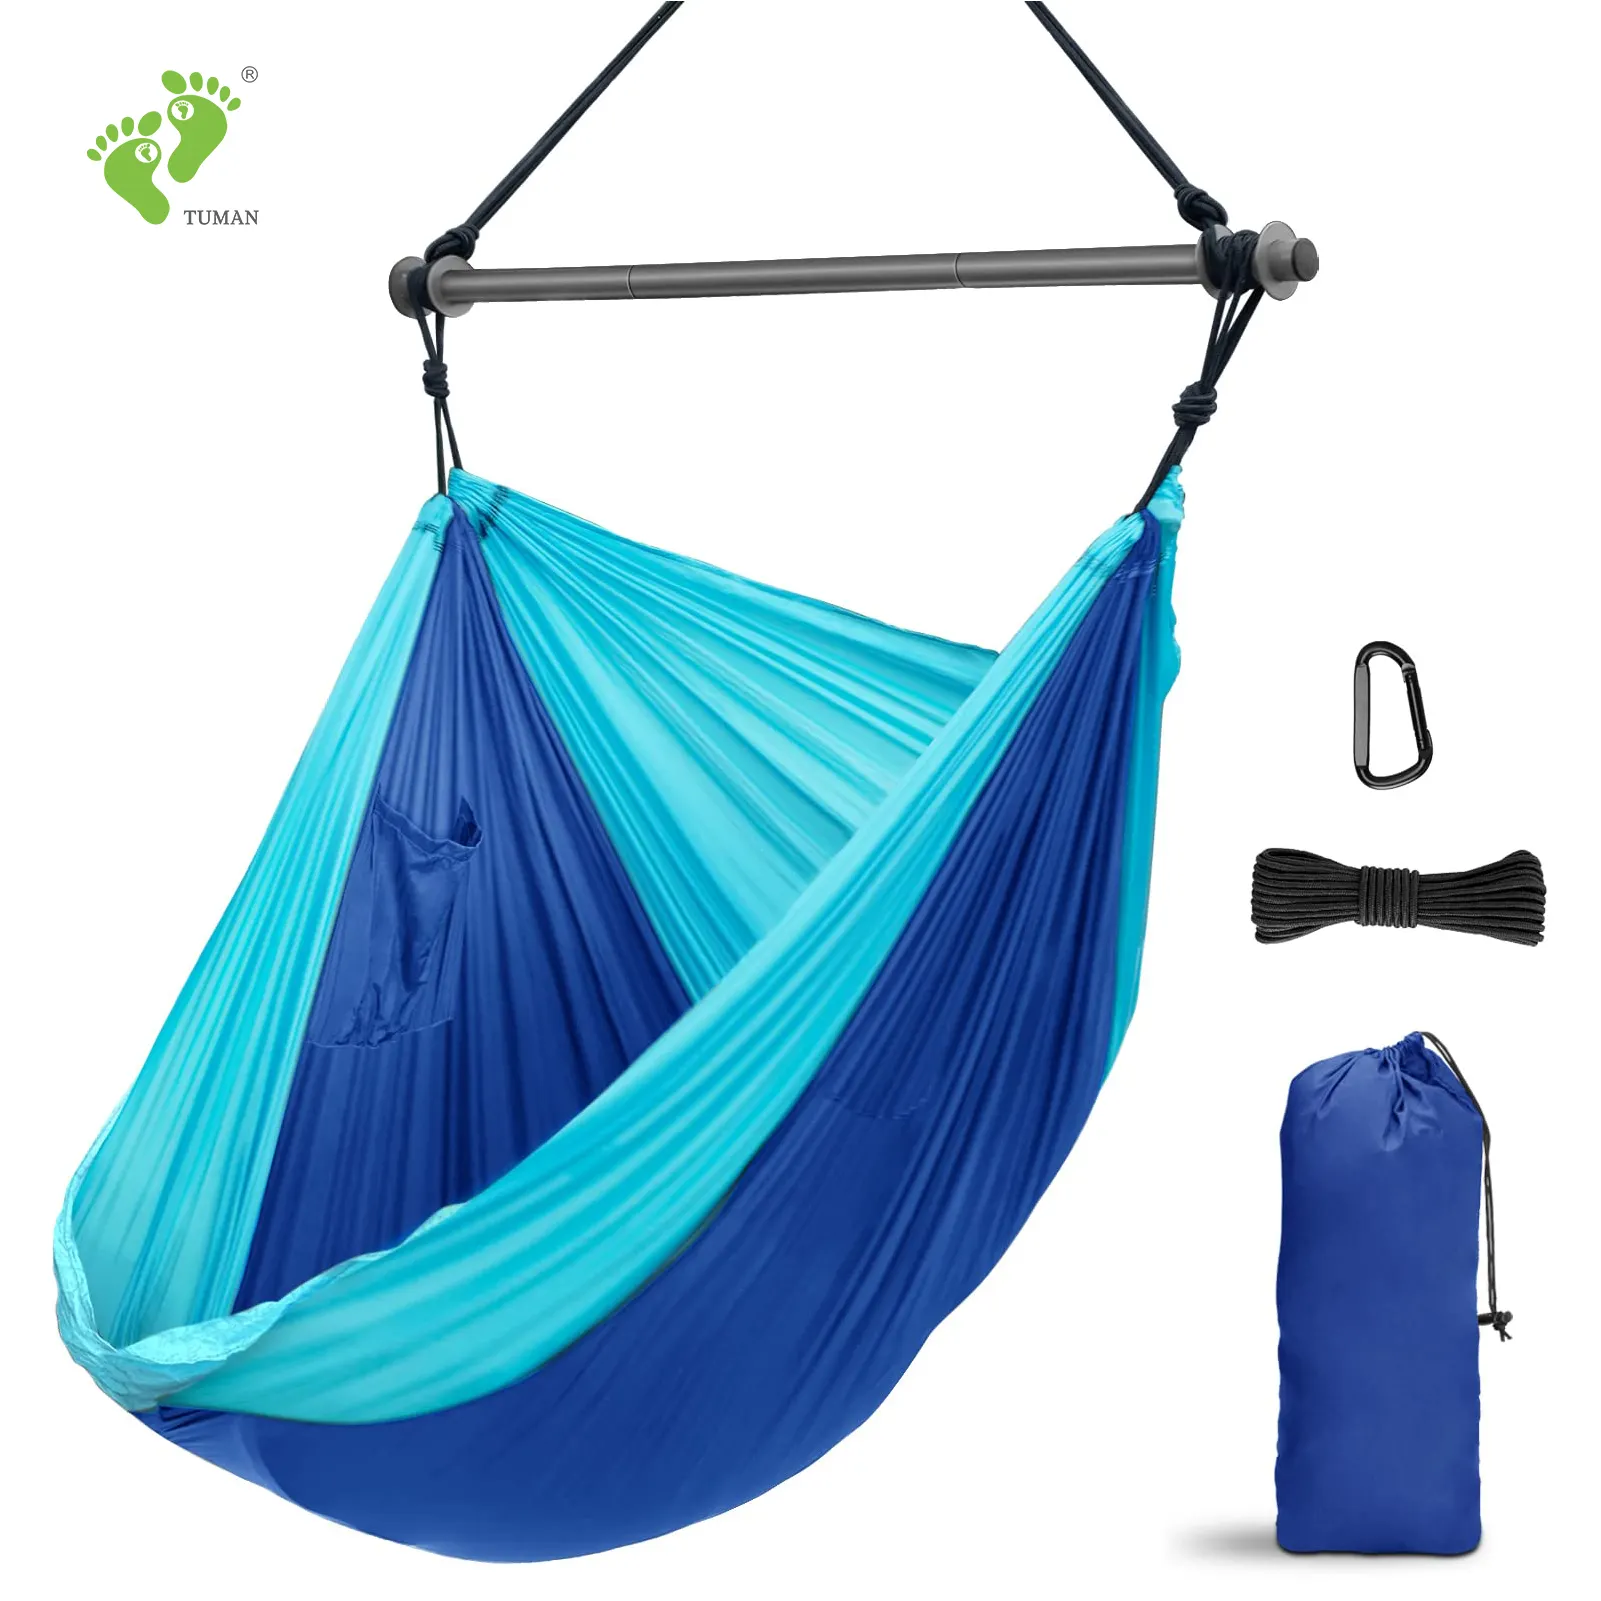 Longson manufacture garden outdoor camping nylon hammock chair swing adult hanging swing chair with pocket